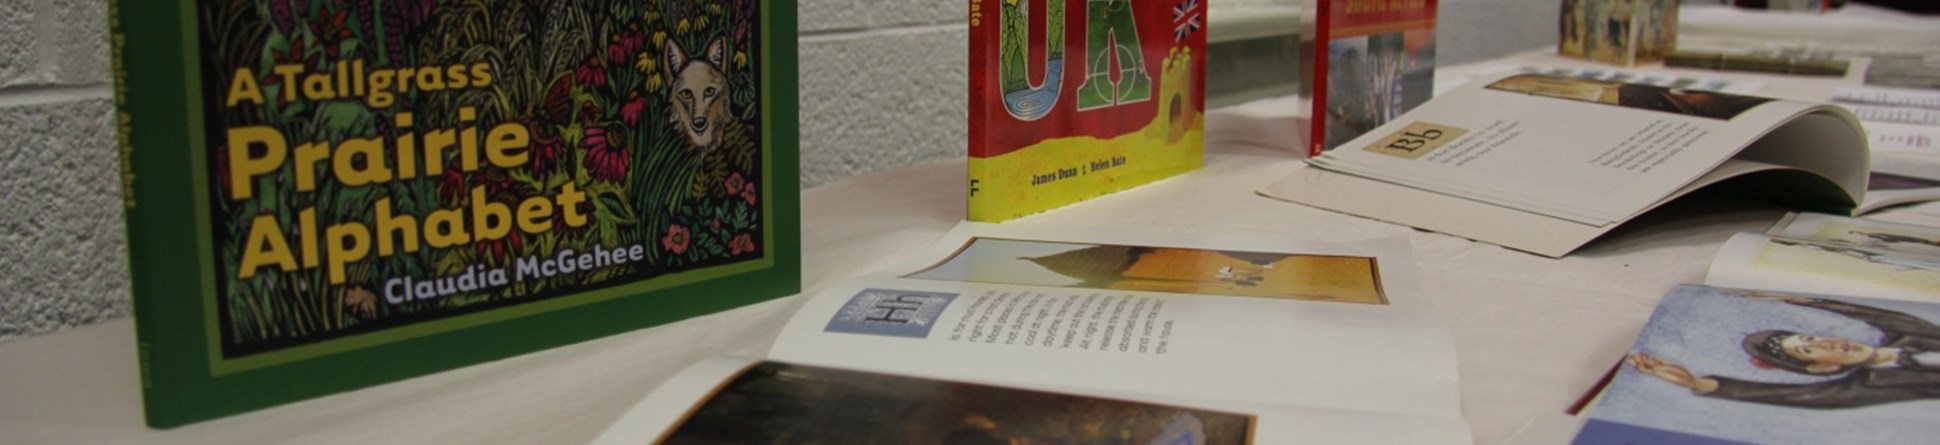 Examples of Alphabet books from Seven Stories archive